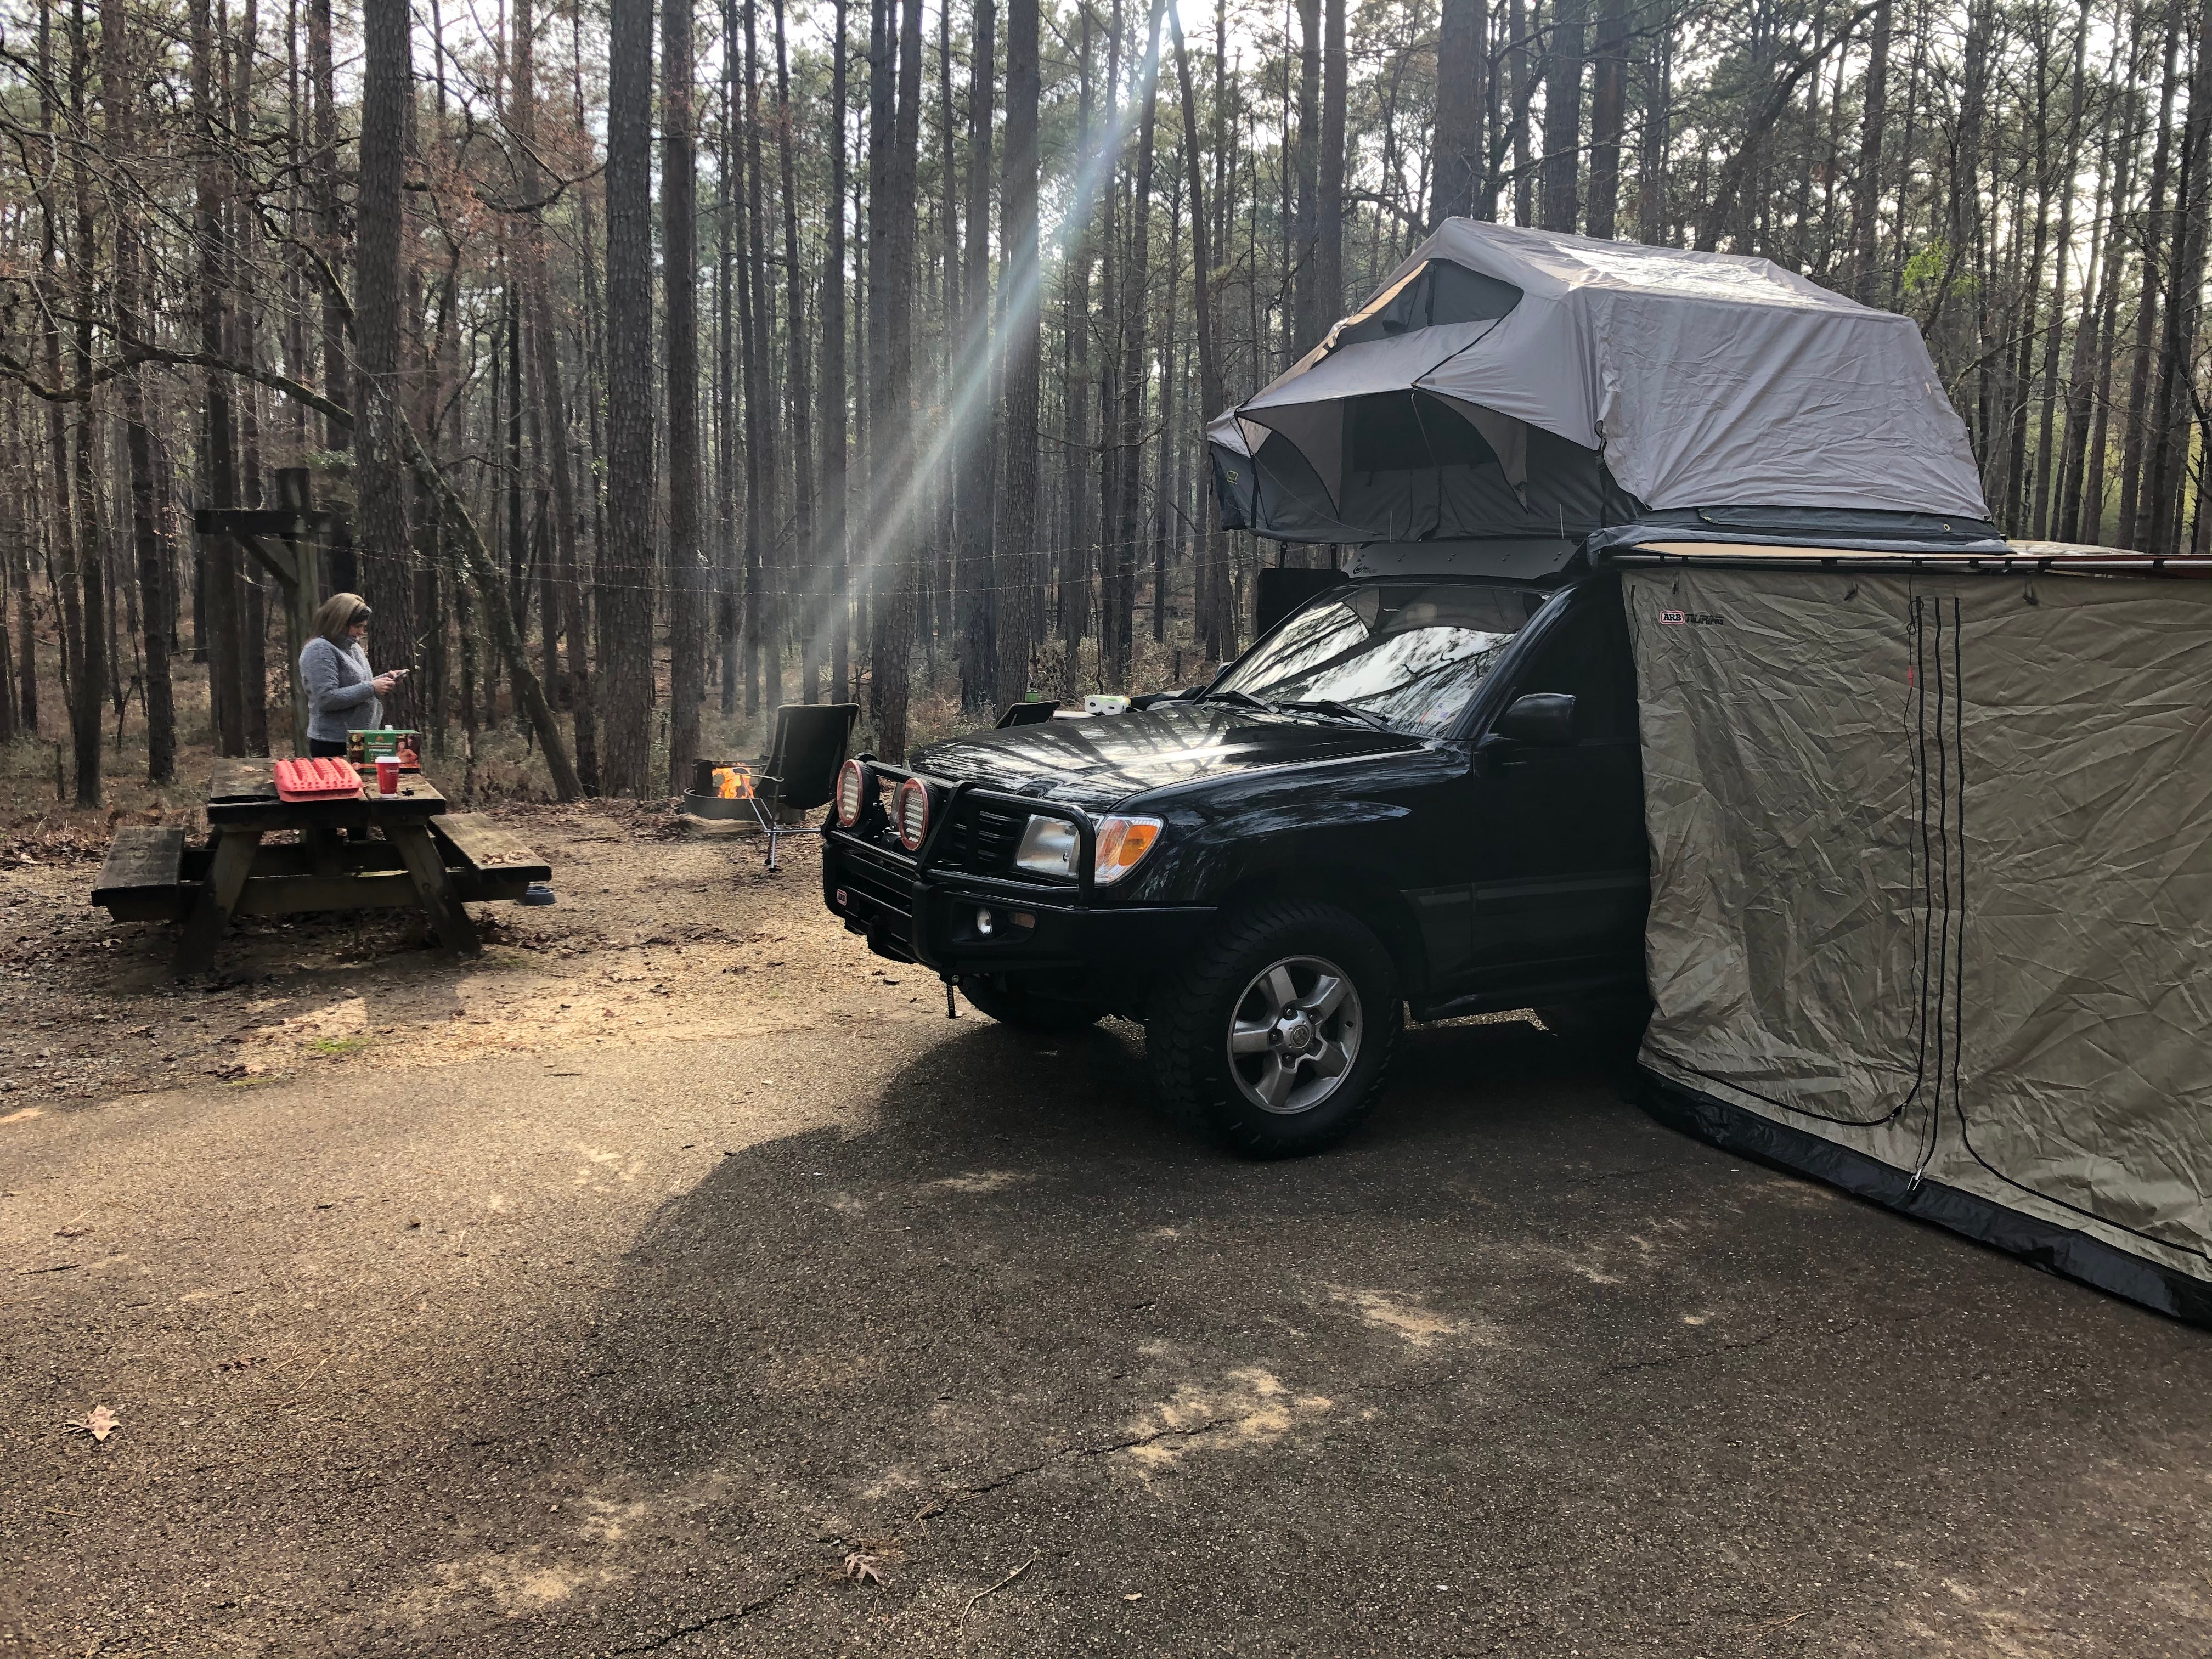 Camper submitted image from Kisatchie National Forest Gum Springs Campground - 1